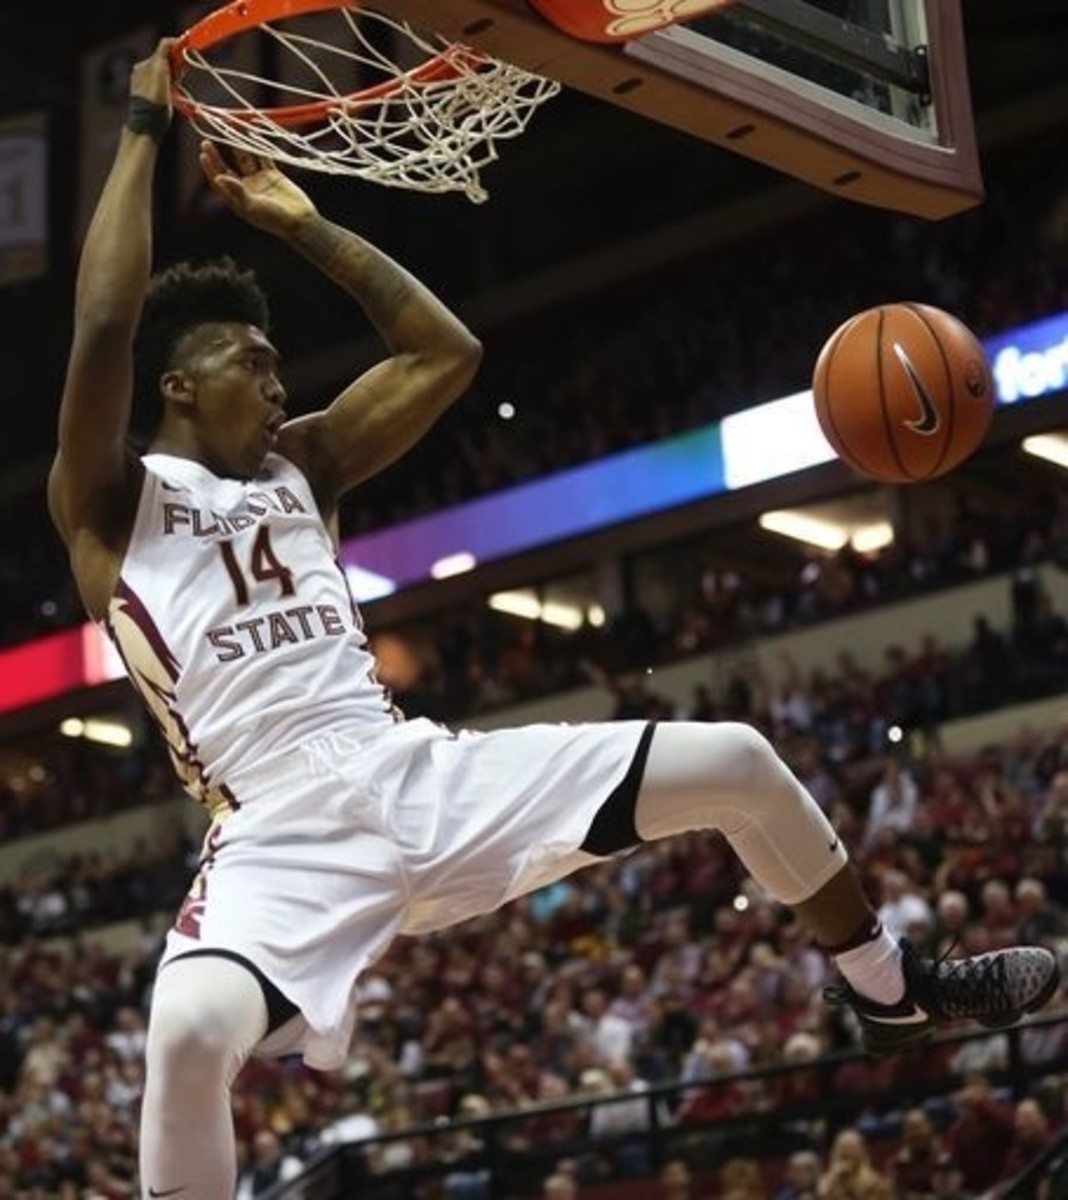 Terance Mann has taken on the role as the best player for the Seminoles.